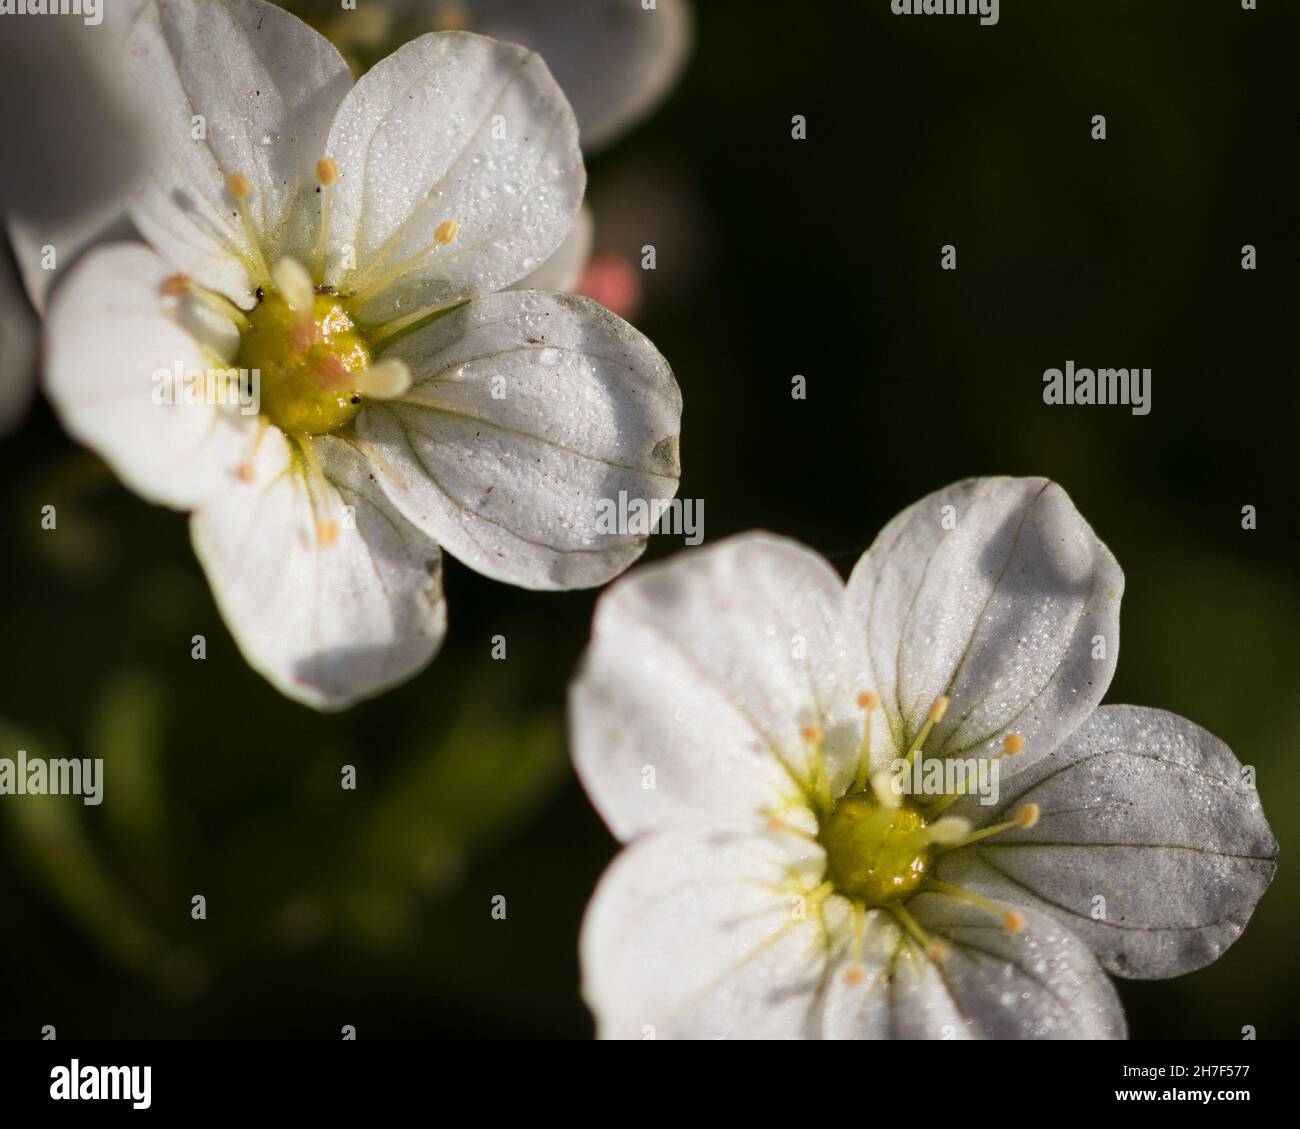 Closeup of Irish saxifrage flowers in the blurred background Stock Photo